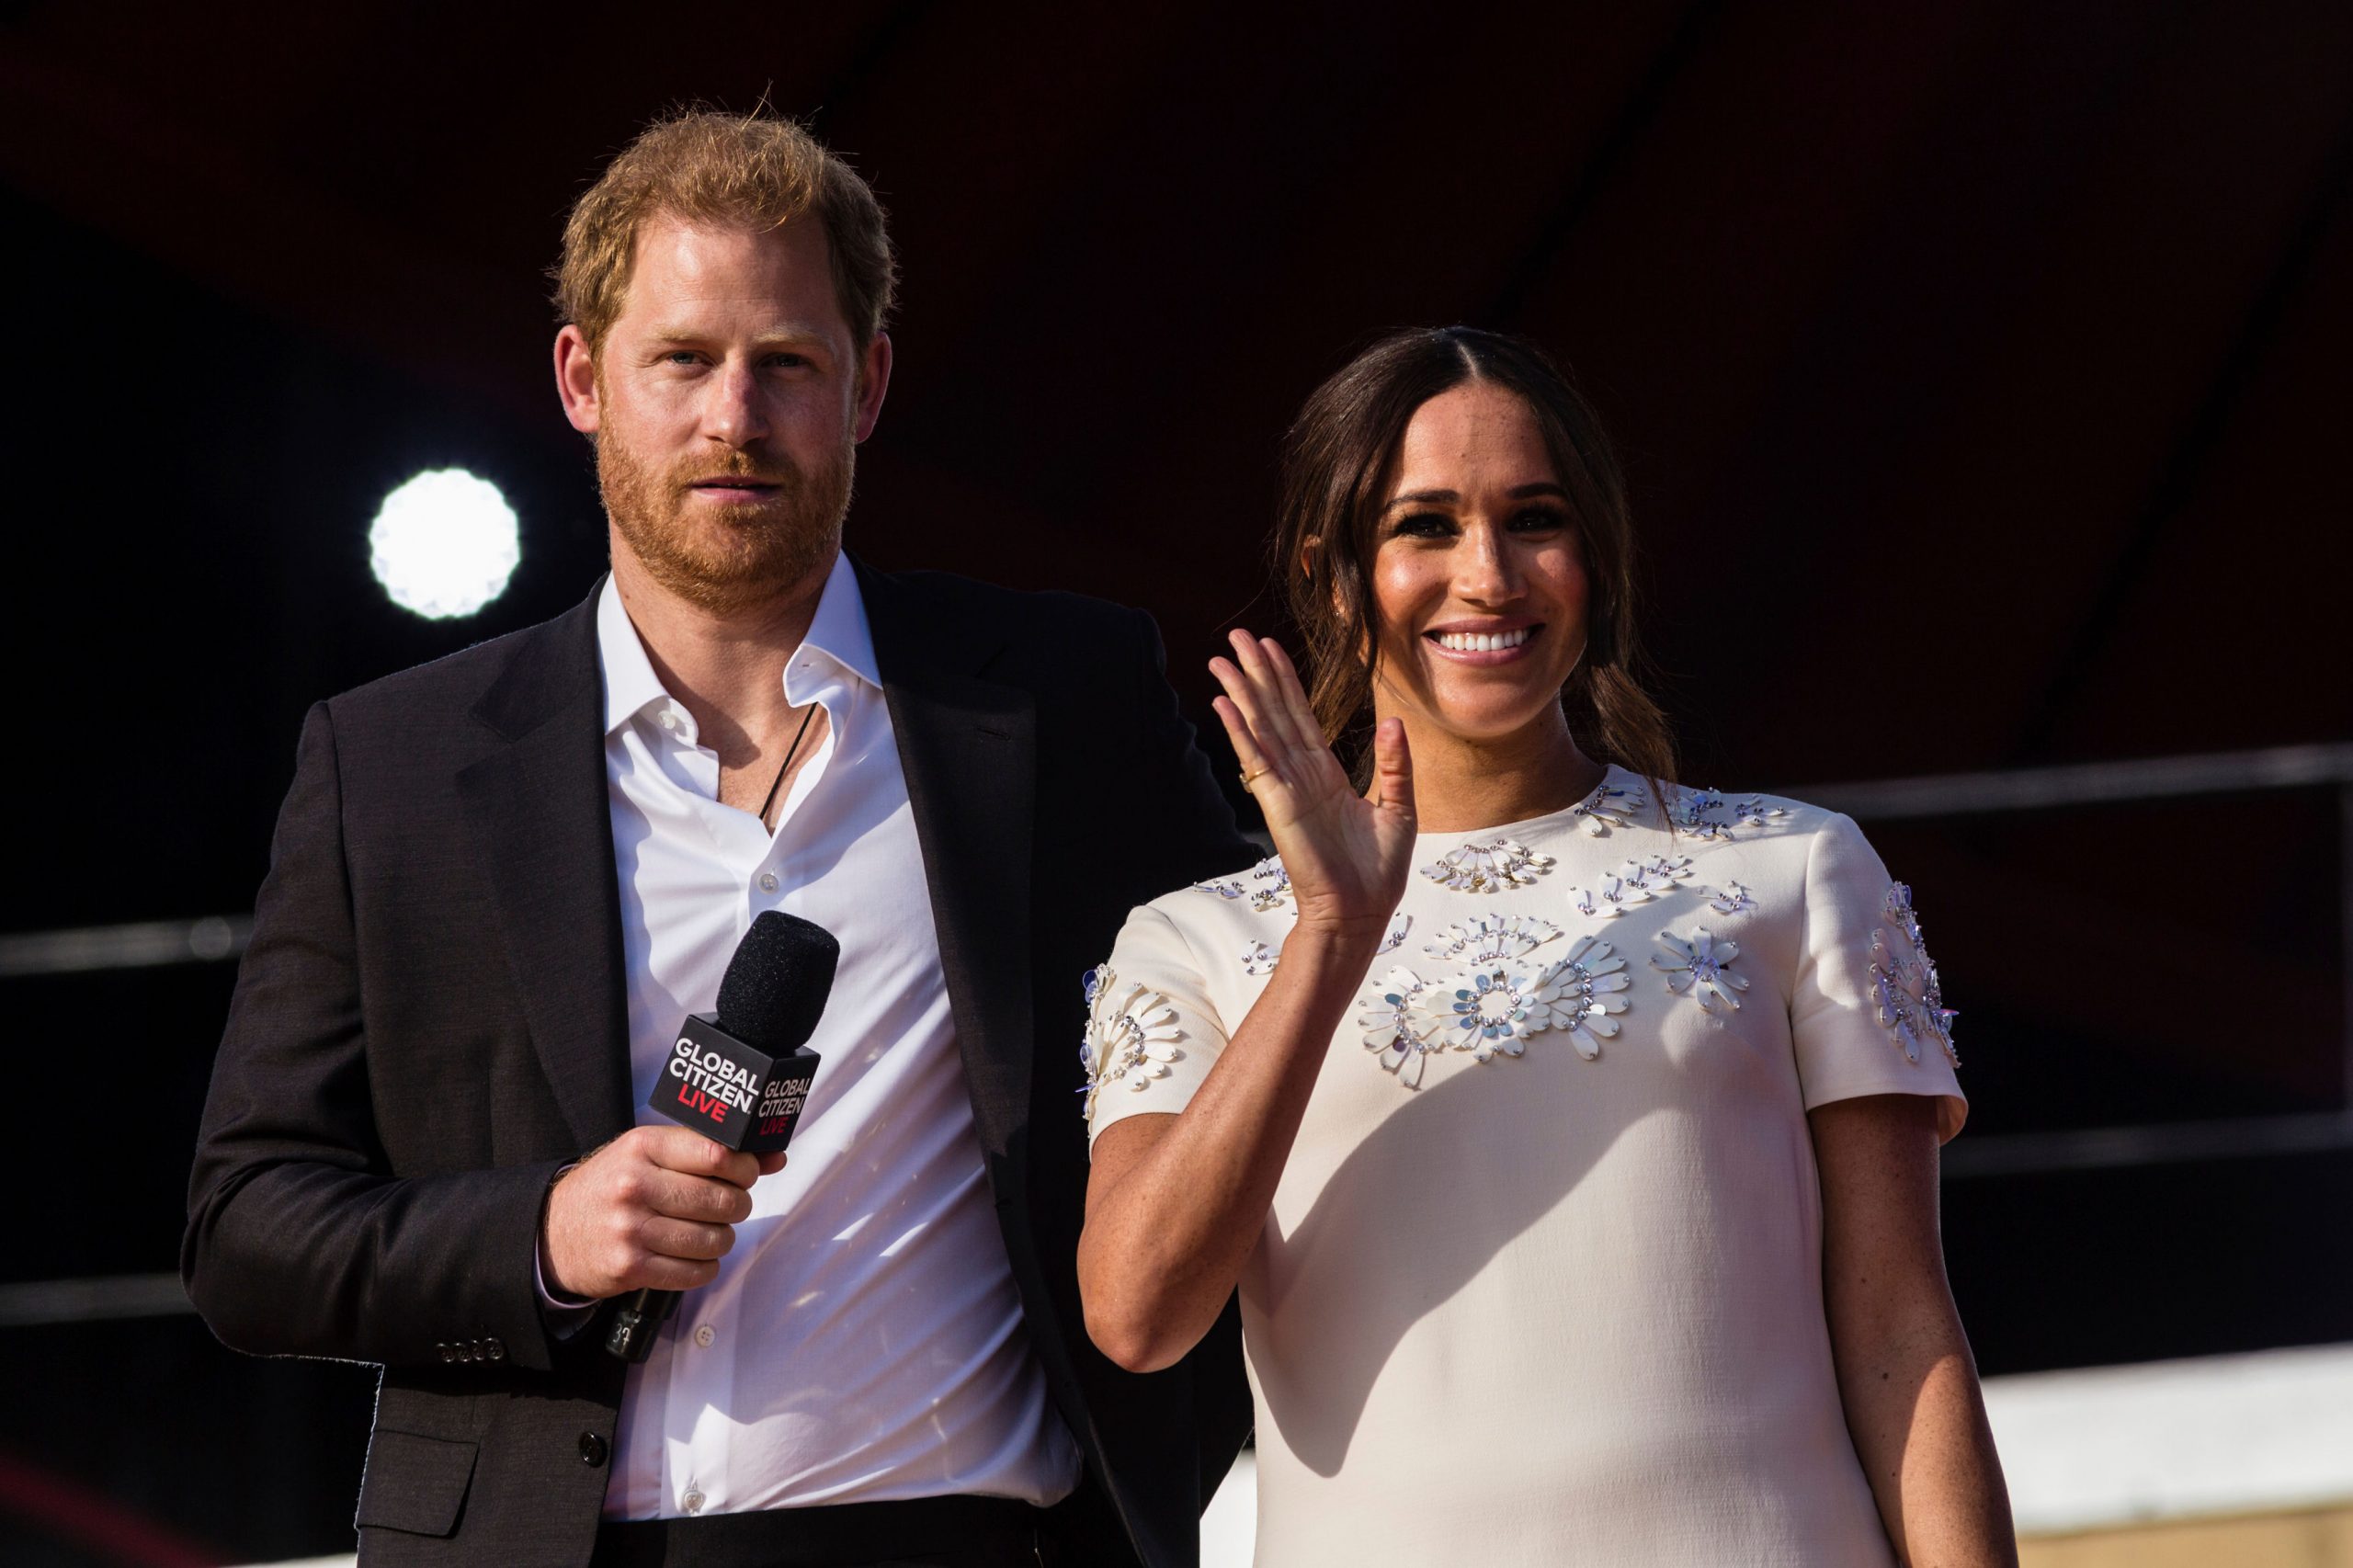 Prince Harry blames media coverage for Meghan Markle’s miscarriage in 2020